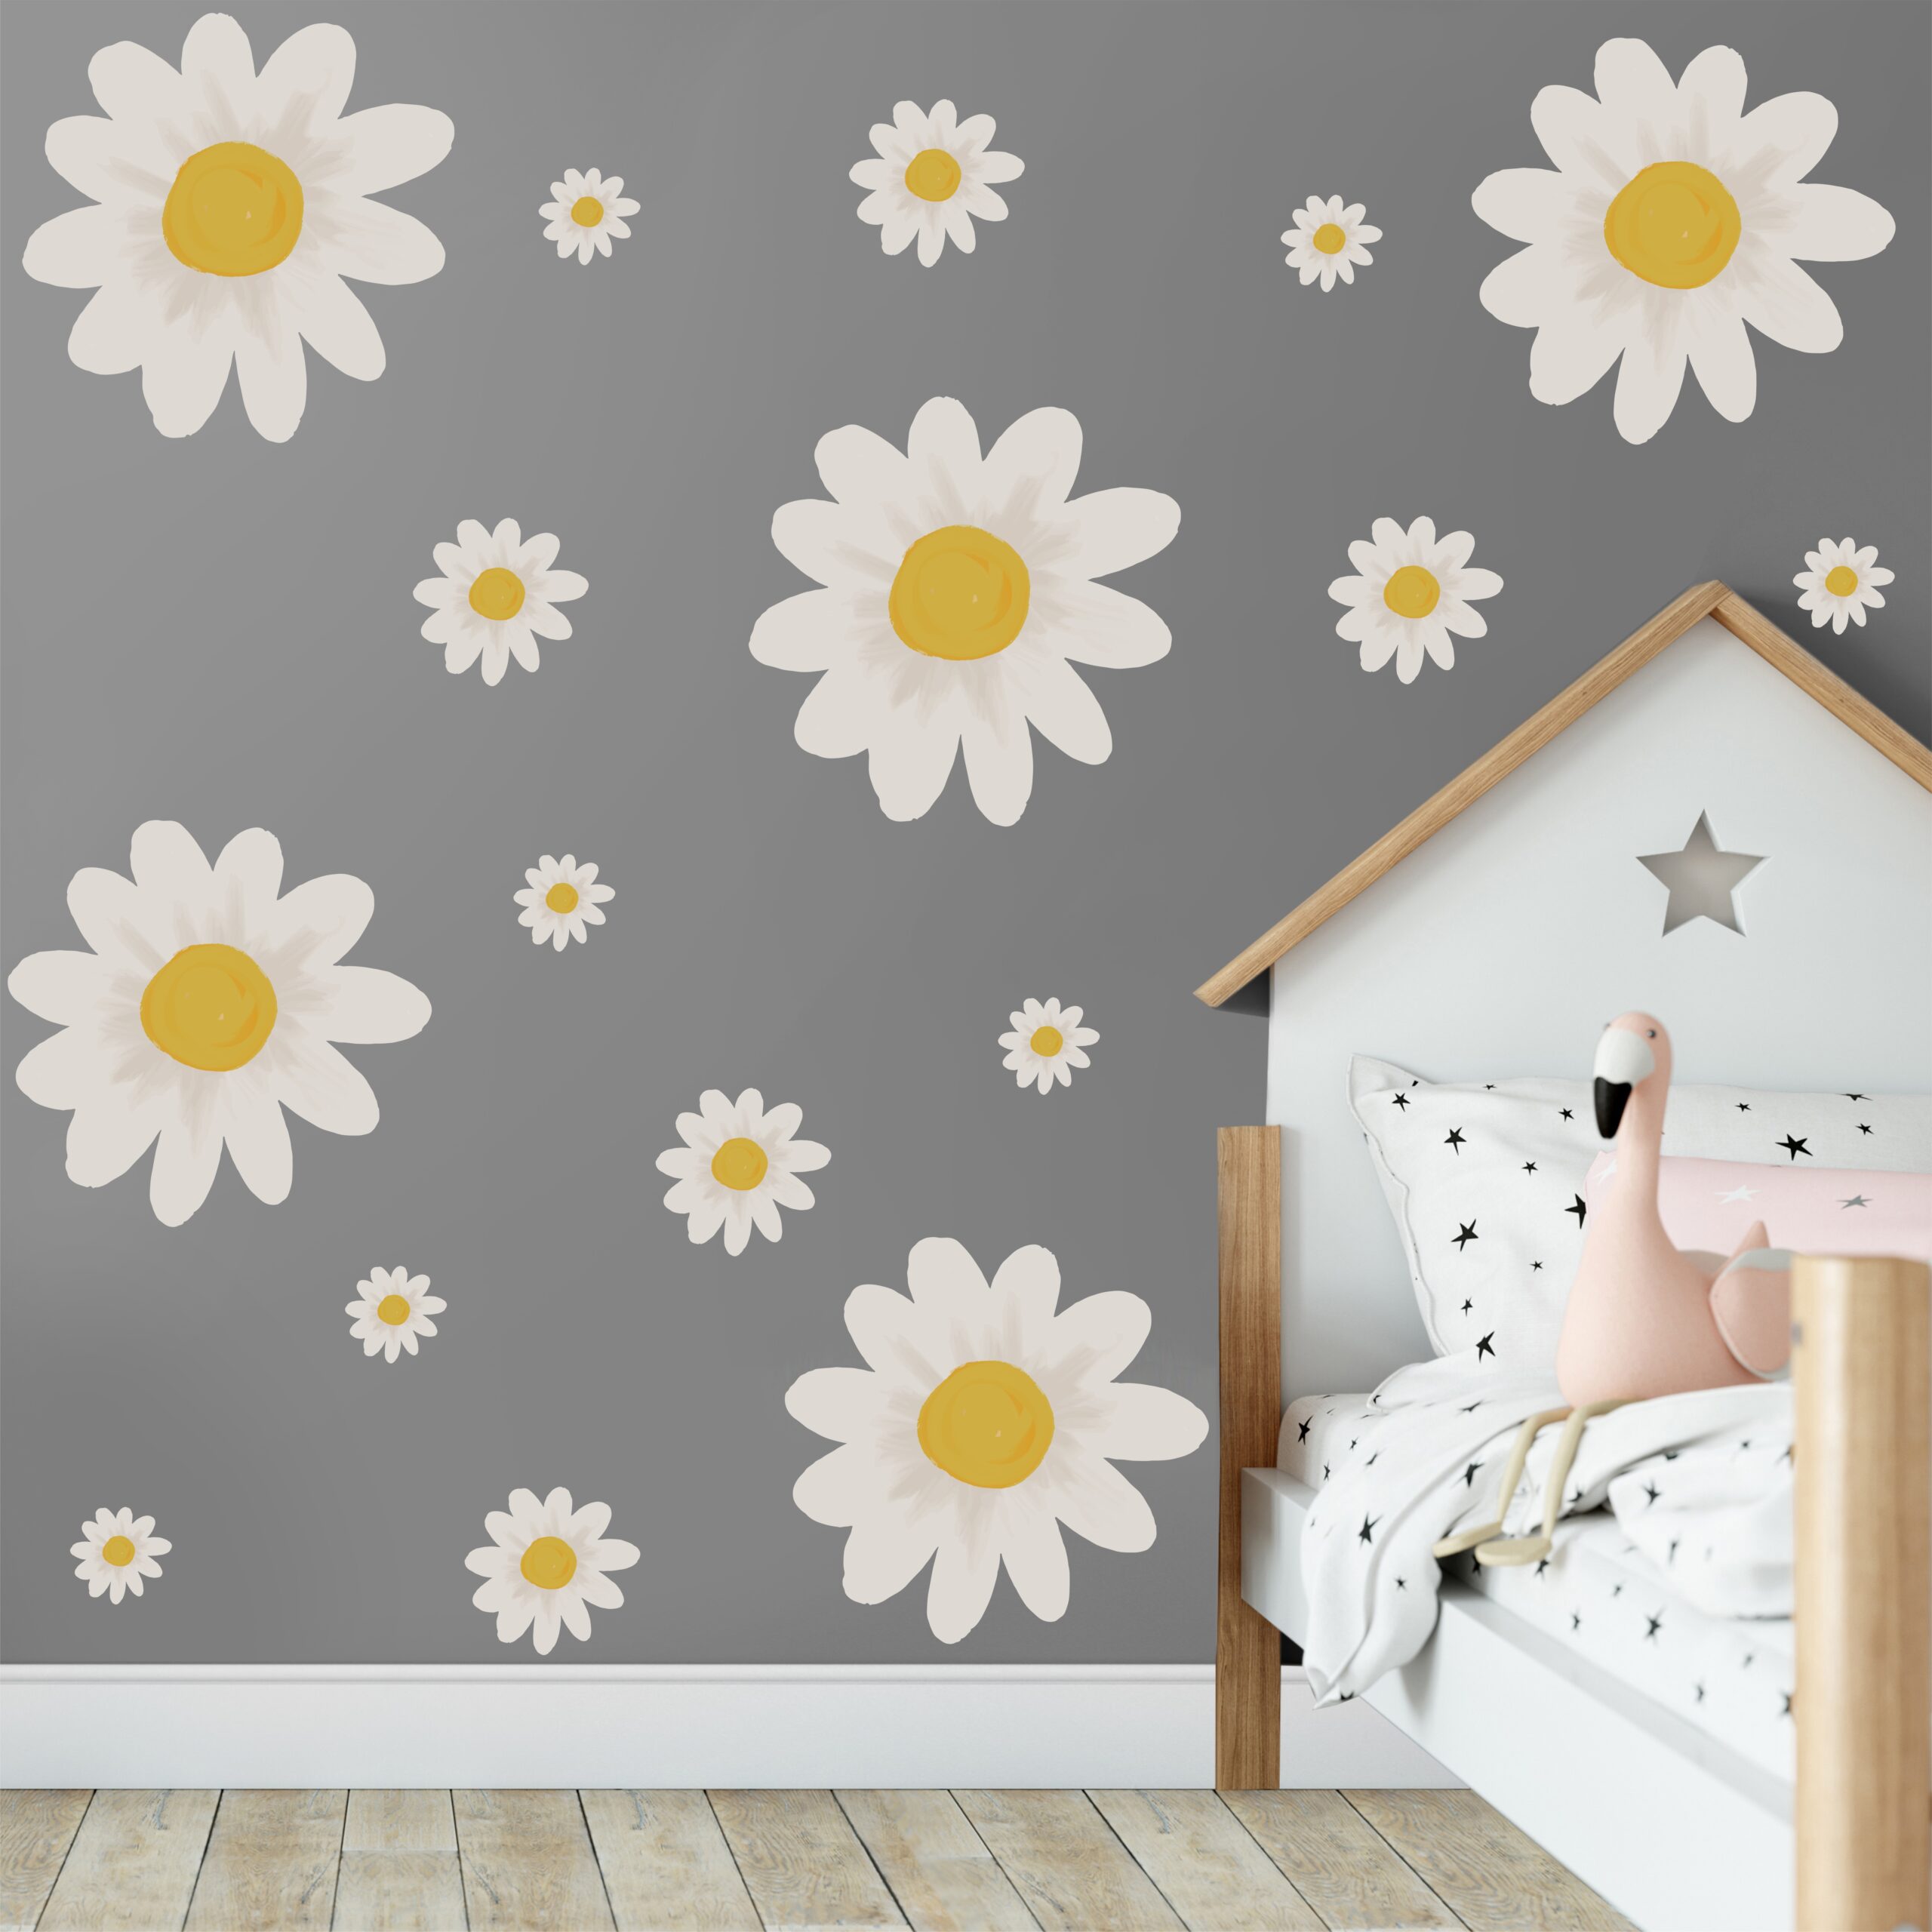 Daisy Wall Decals, remove wall decal